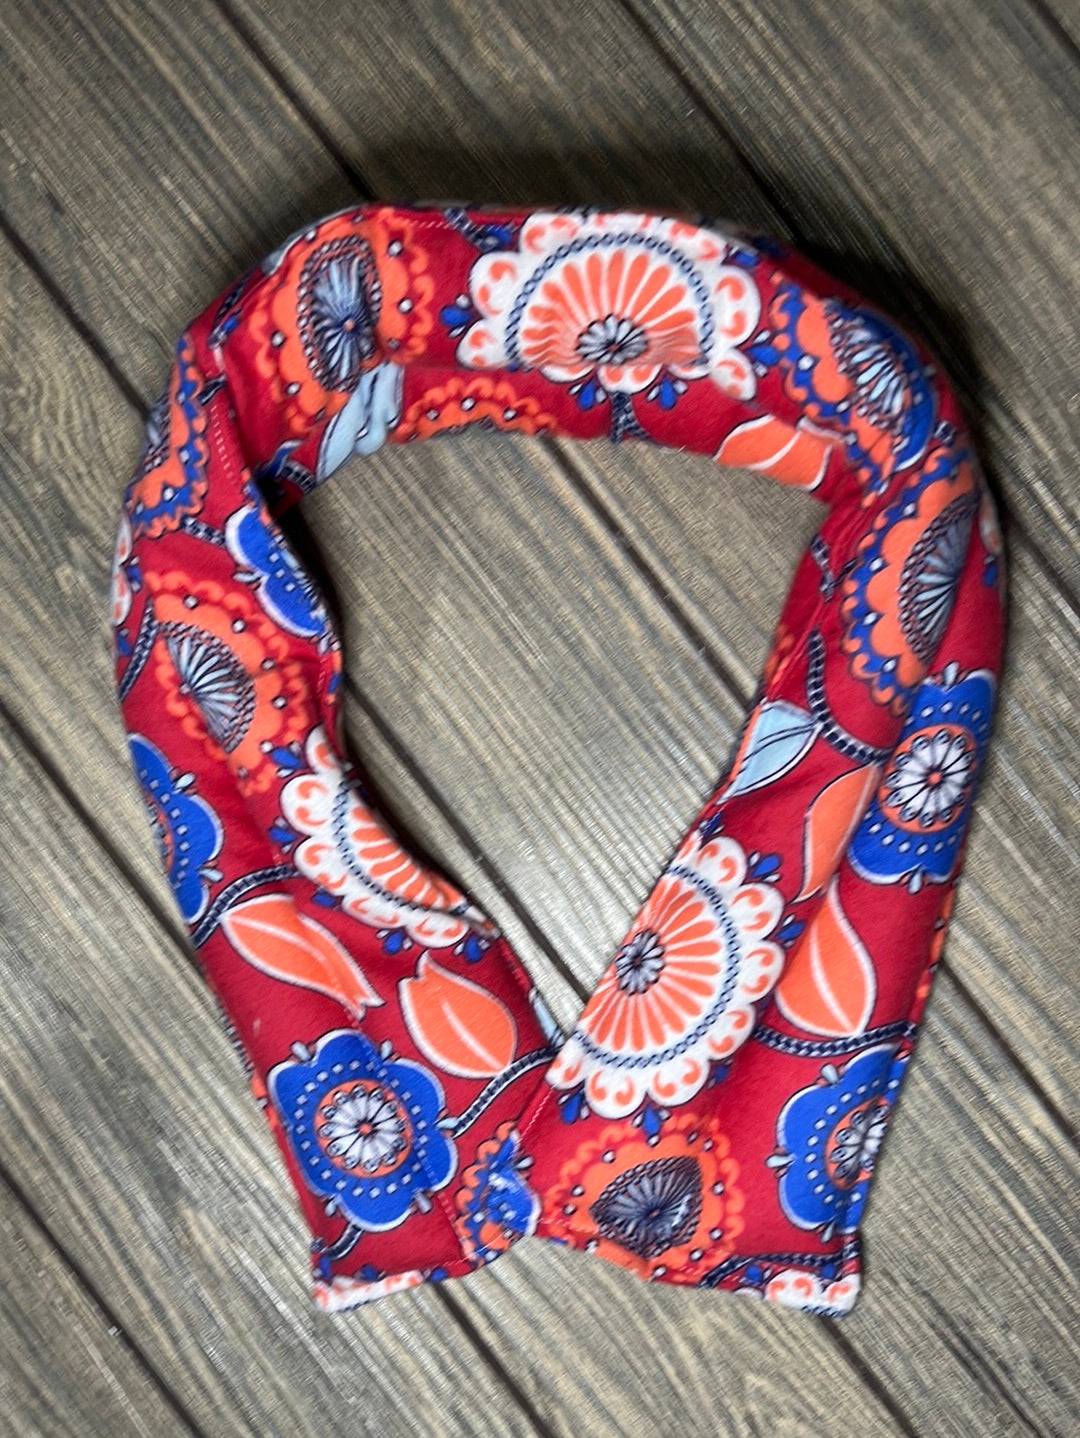 Heat Therapy Rice Bag, EmJ Neck Wrap, Coral Floral